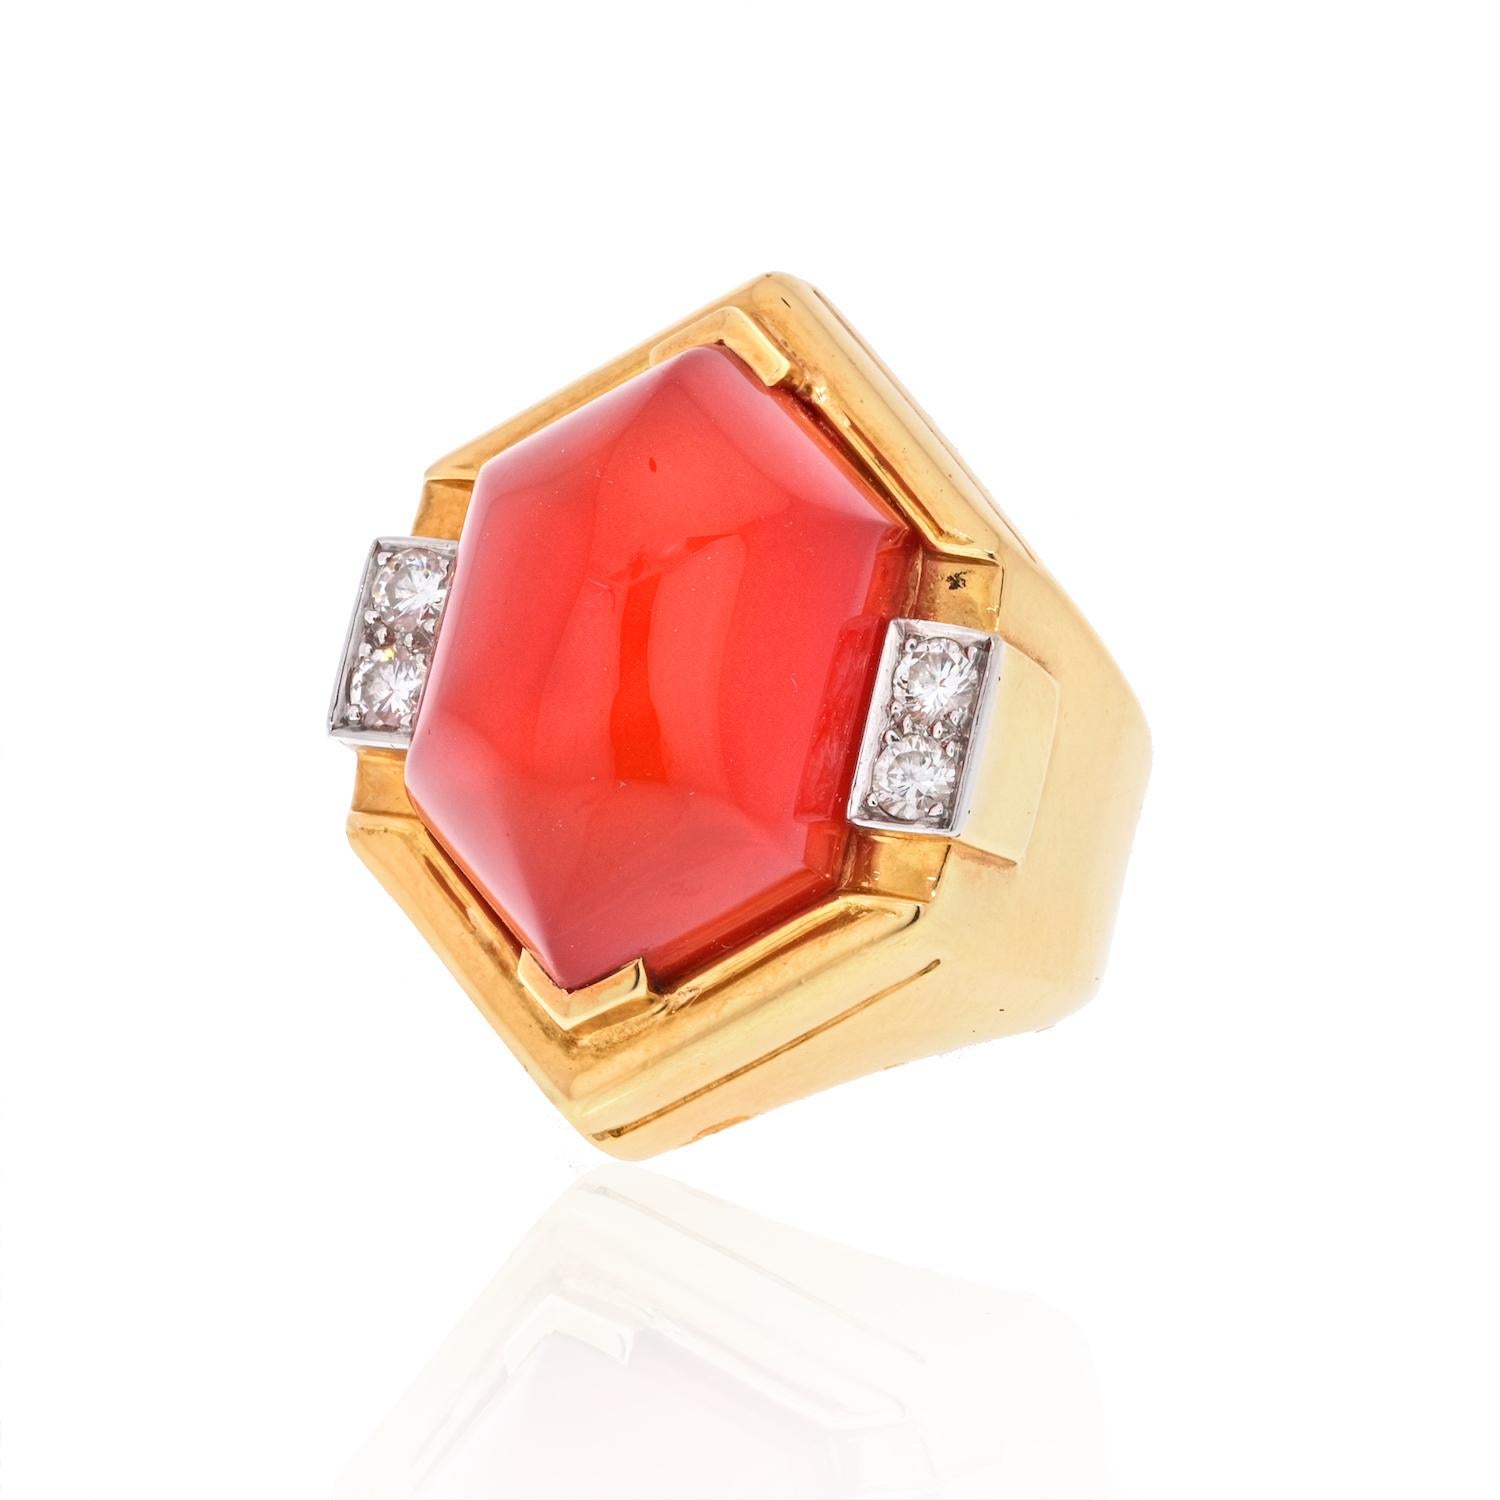 David Webb Platinum & 18K Yellow Gold Carnelian Shield Frame Diamond Ring.
18K yellow gold, stamped: Webb
Centering a hexagonal carnelian cabochon flanked by four full-cut diamonds totaling approximately 0.30 ct. and graded G-H color, VS